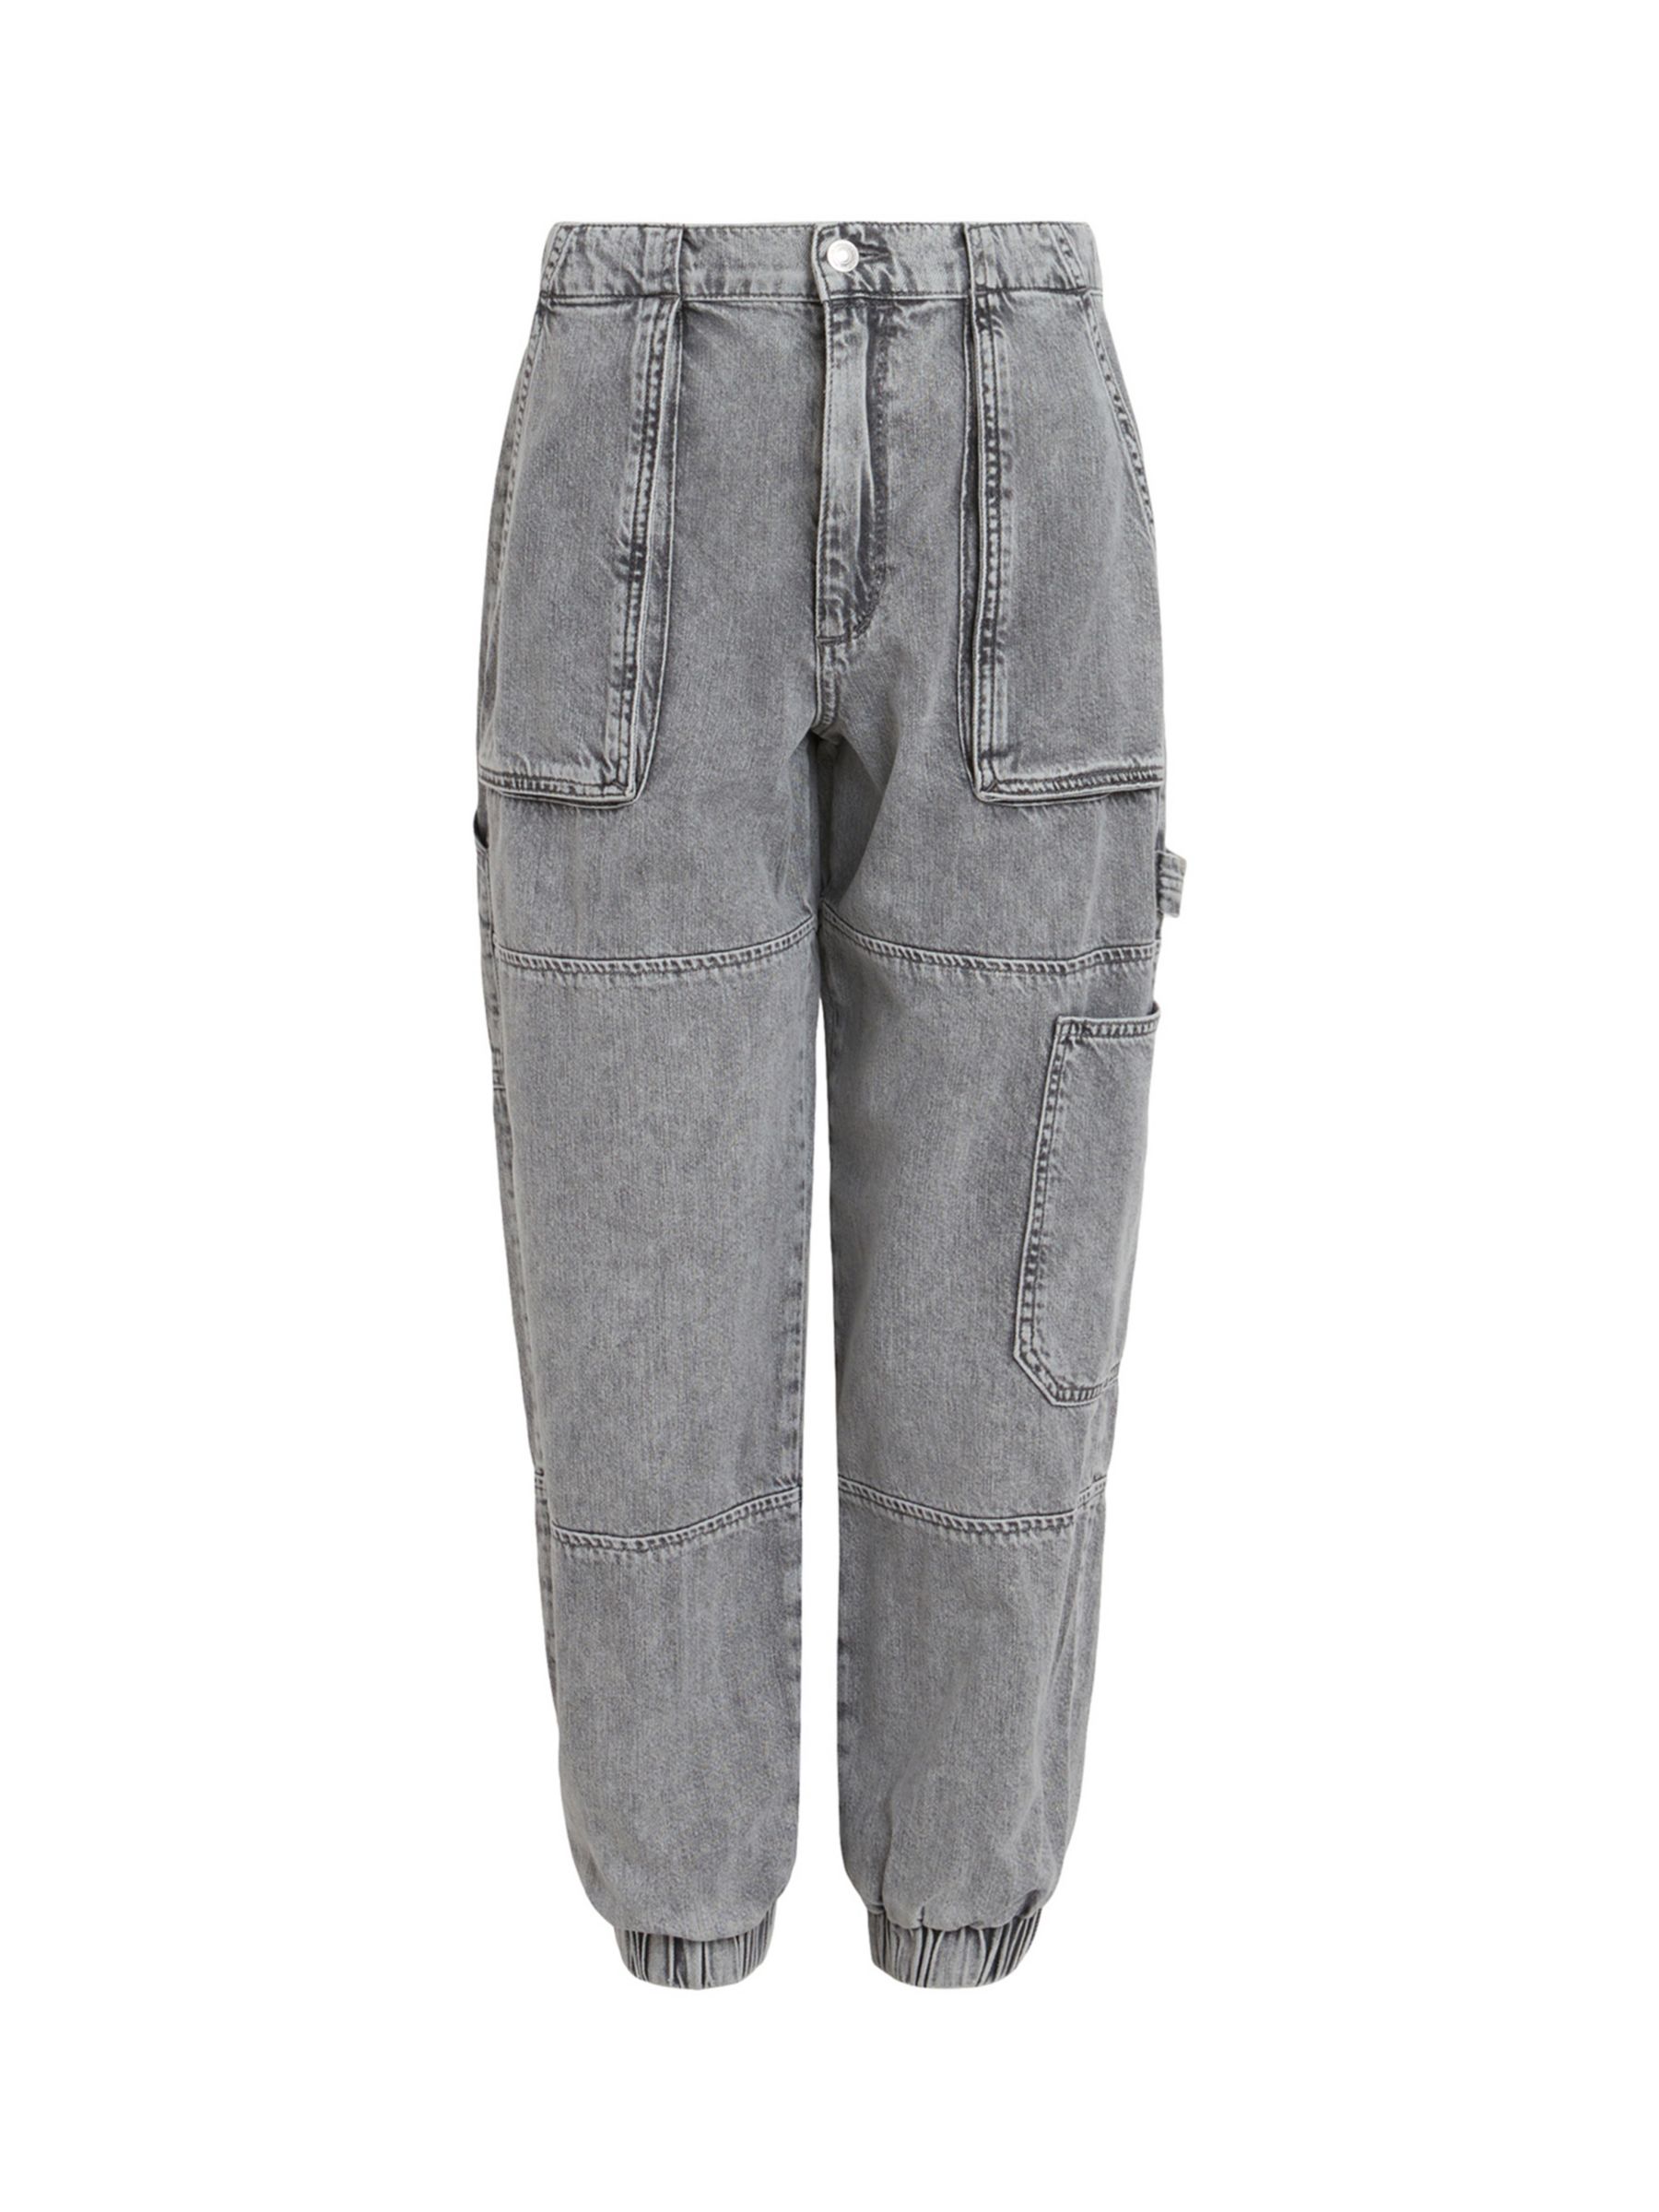 AllSaints Mila High Rise Relaxed Cuffed Jeans, Washed Grey, 12